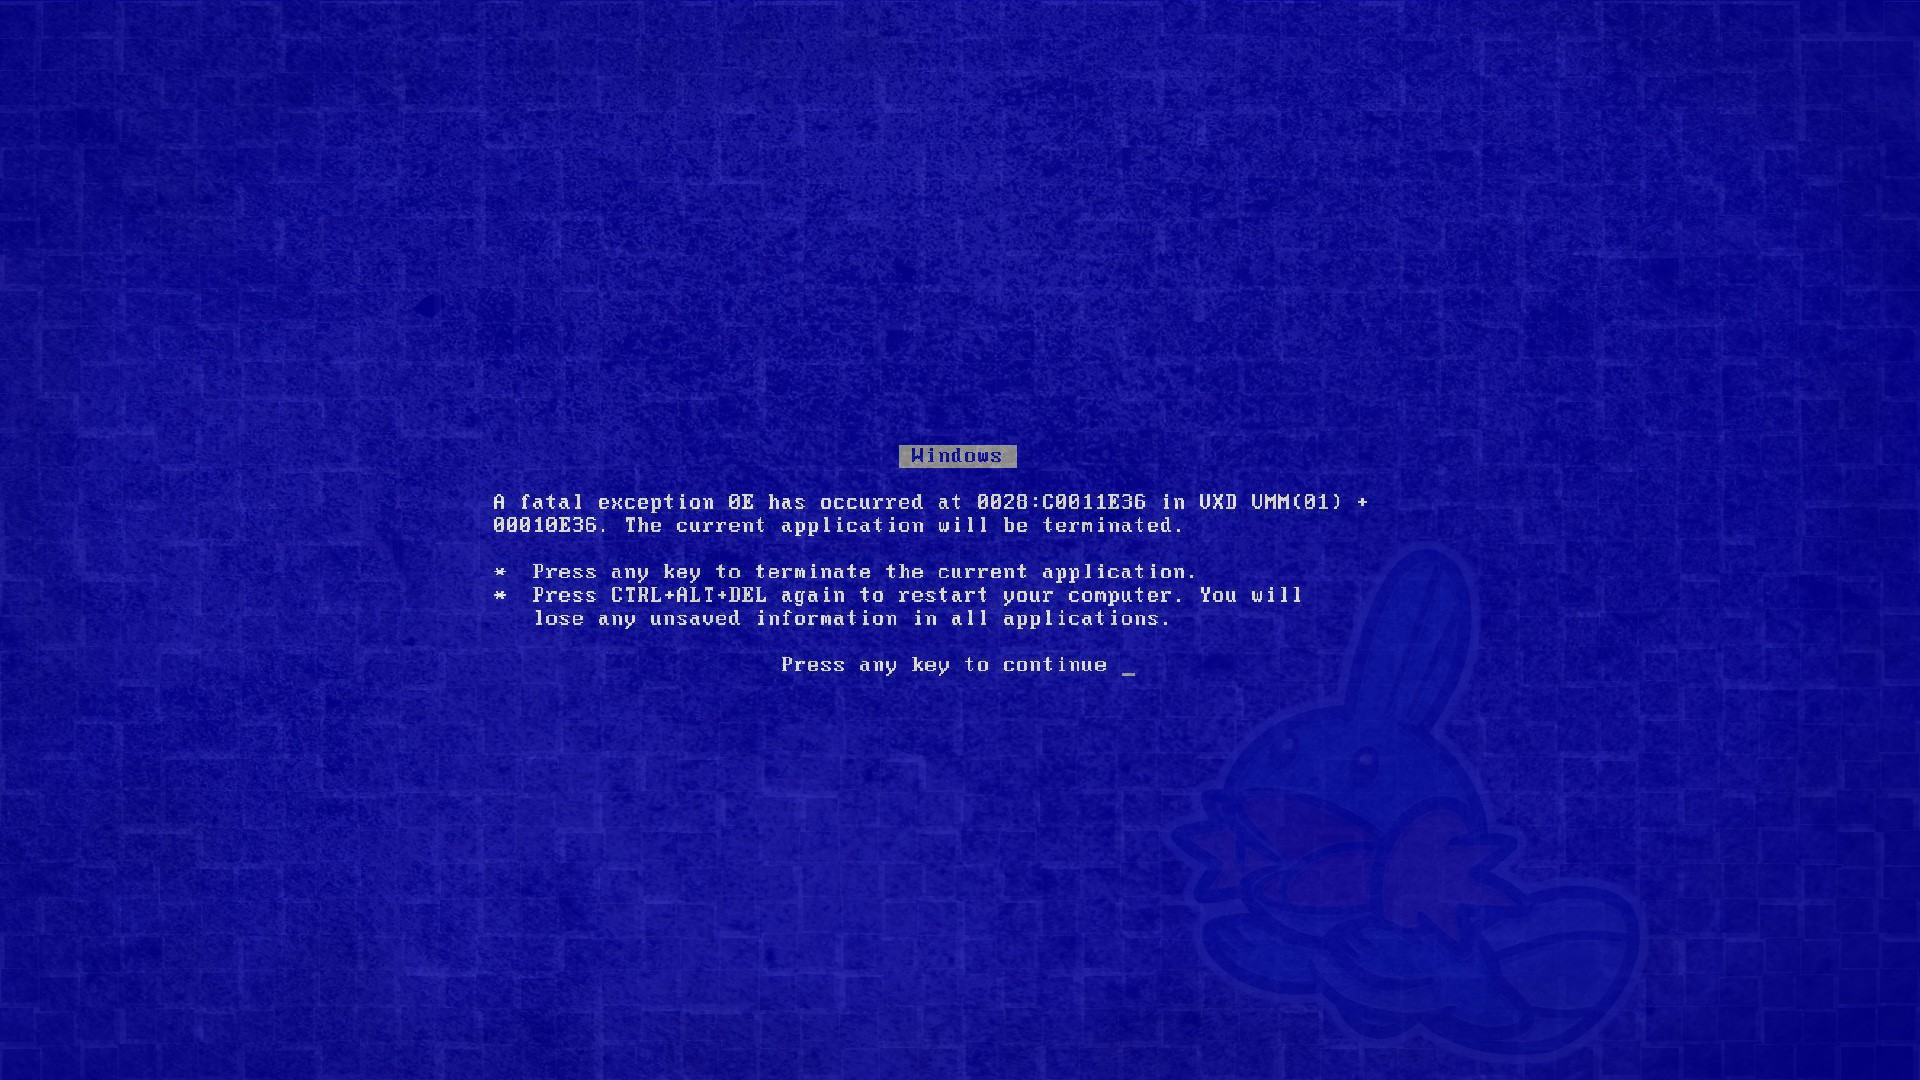 Blue Screen Of Death Text Watermarked 1920x1080